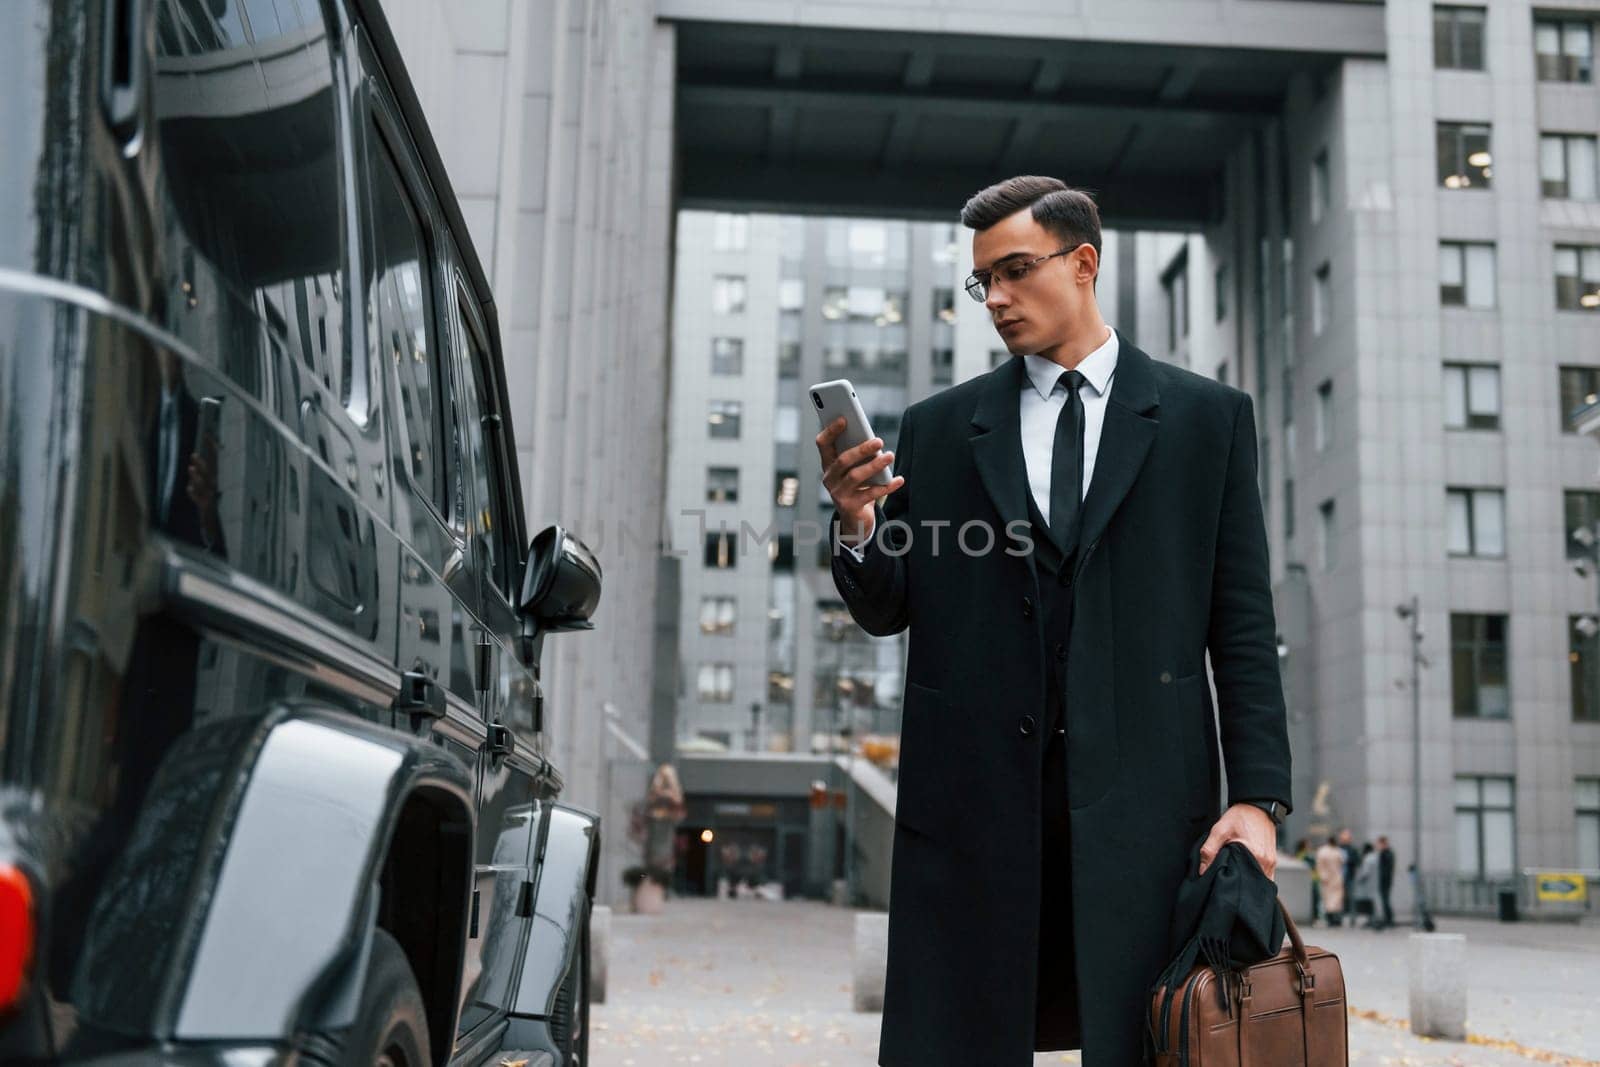 Standing near black car. Businessman in black suit and tie is outdoors in the city by Standret